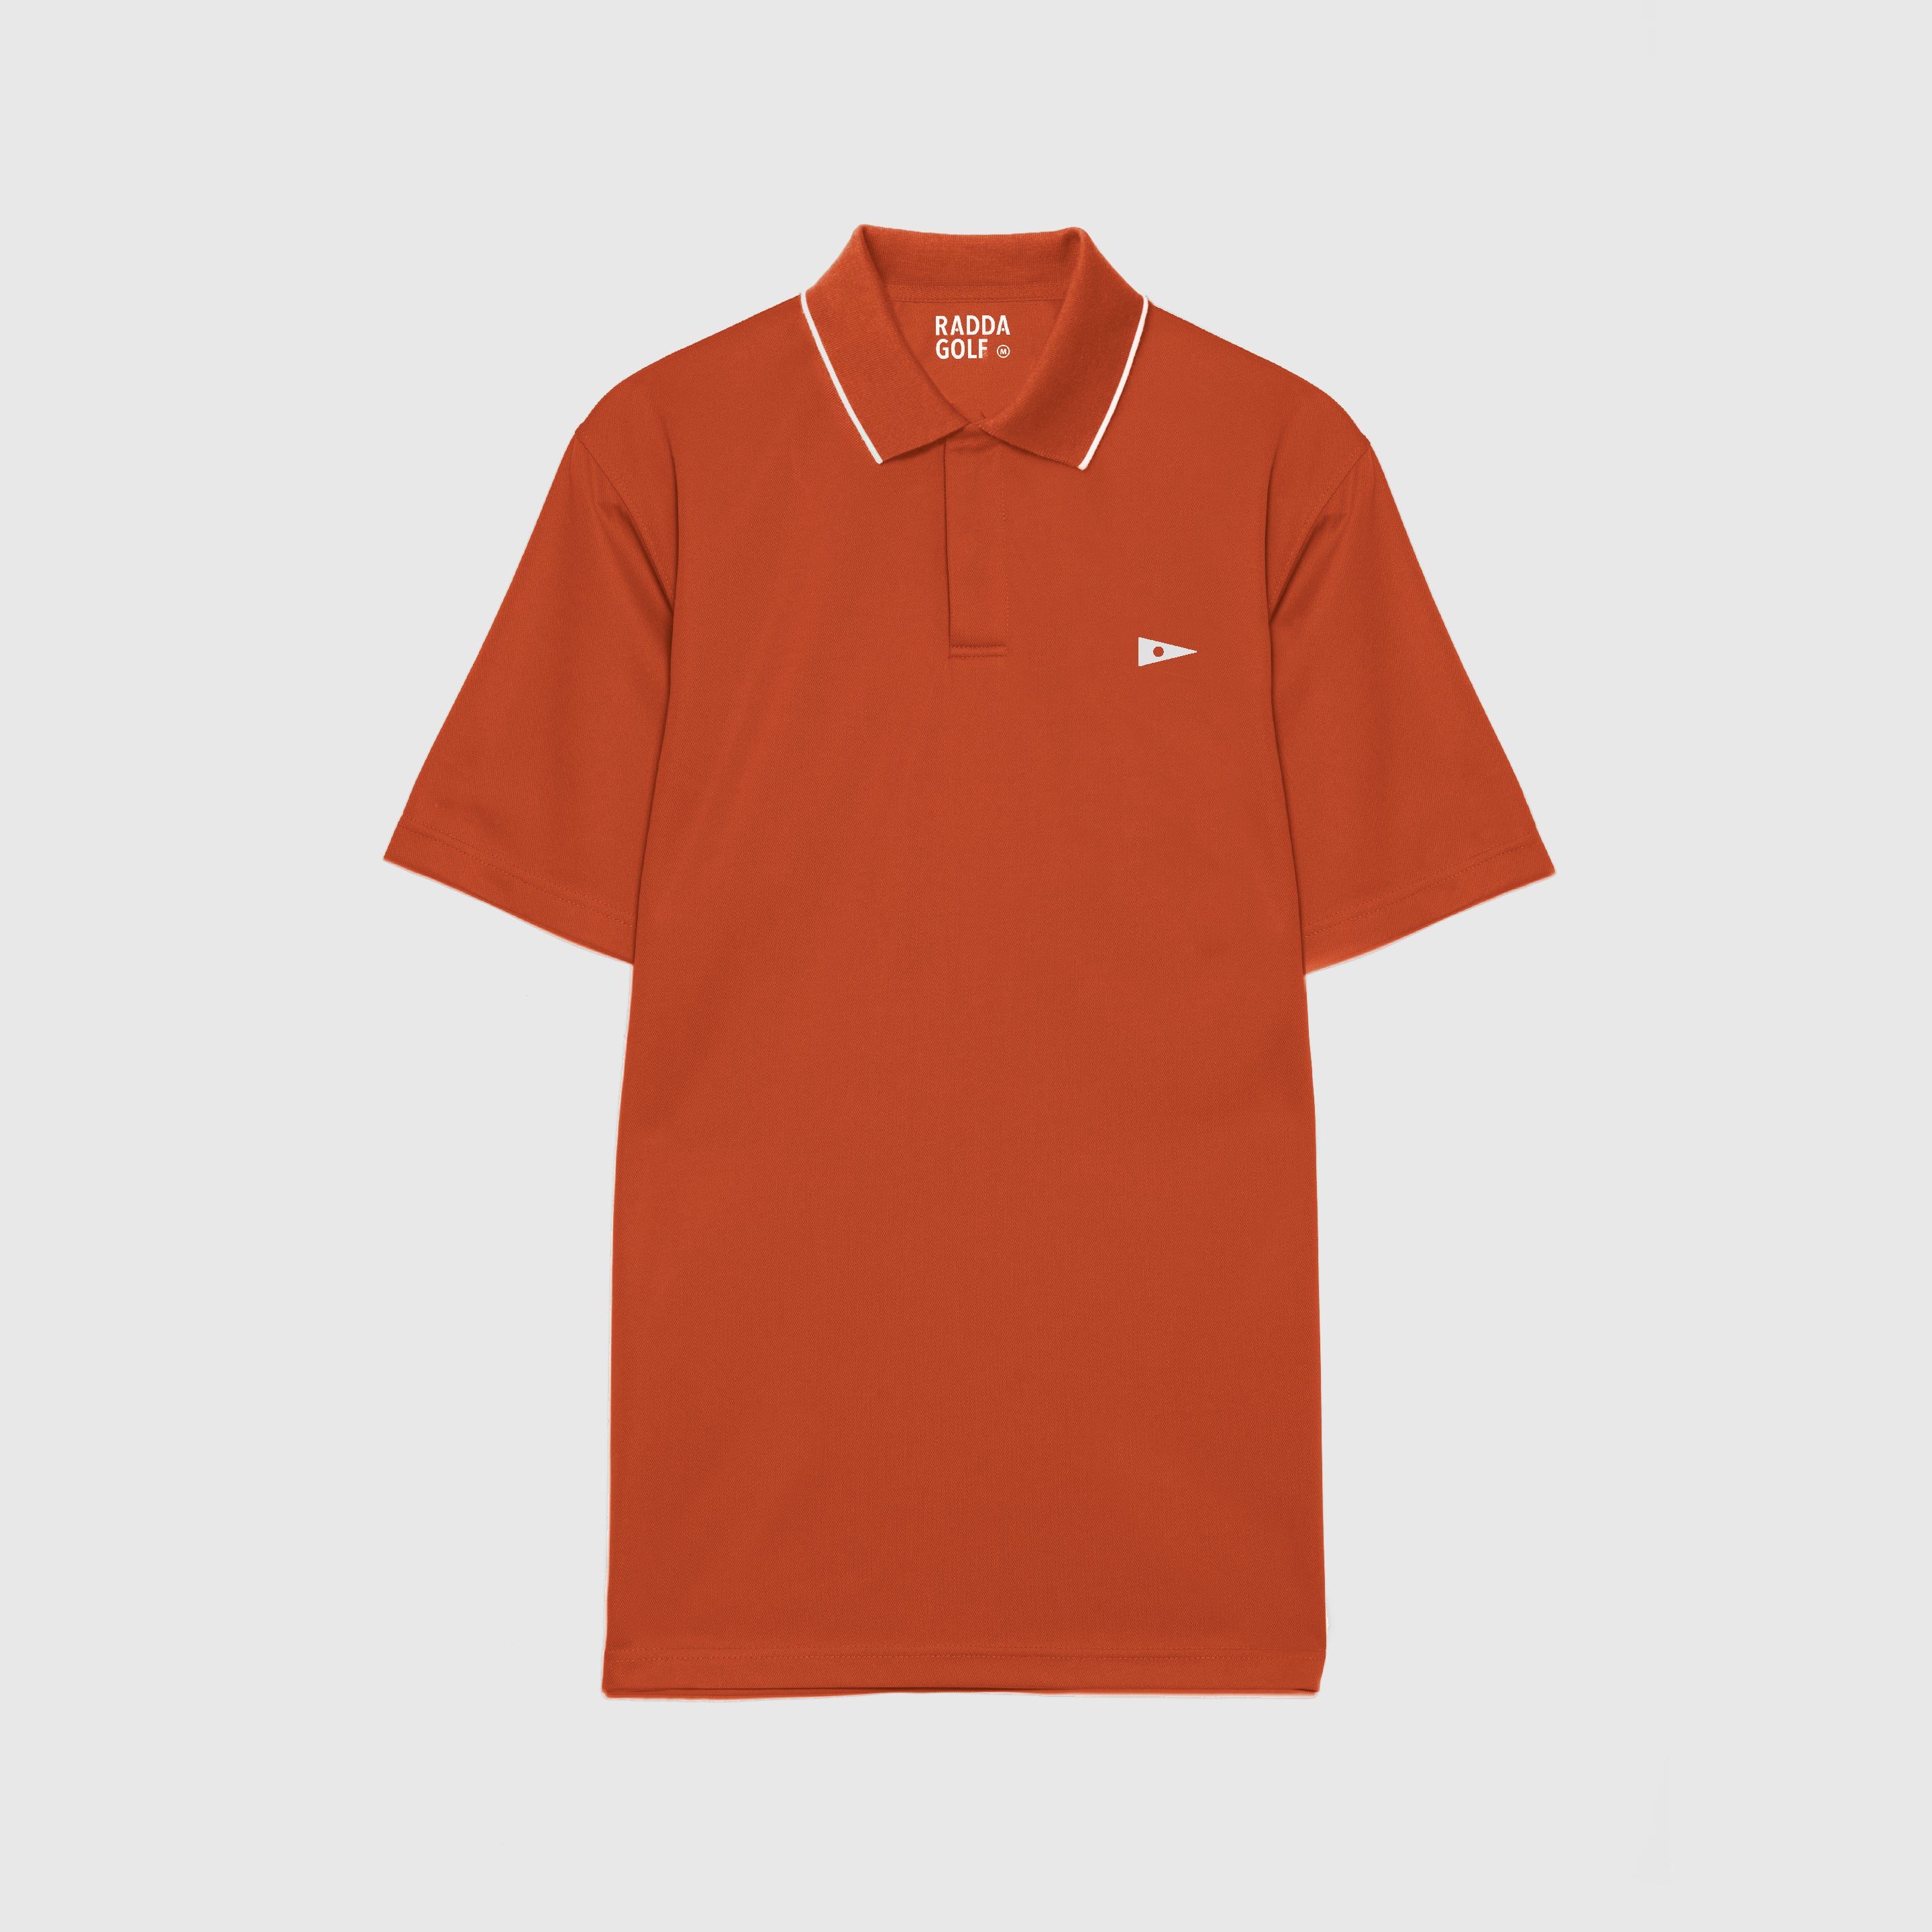 47 Best Golf Clothing Brands for Men in 2023 - Most Stylish Golf Clothes